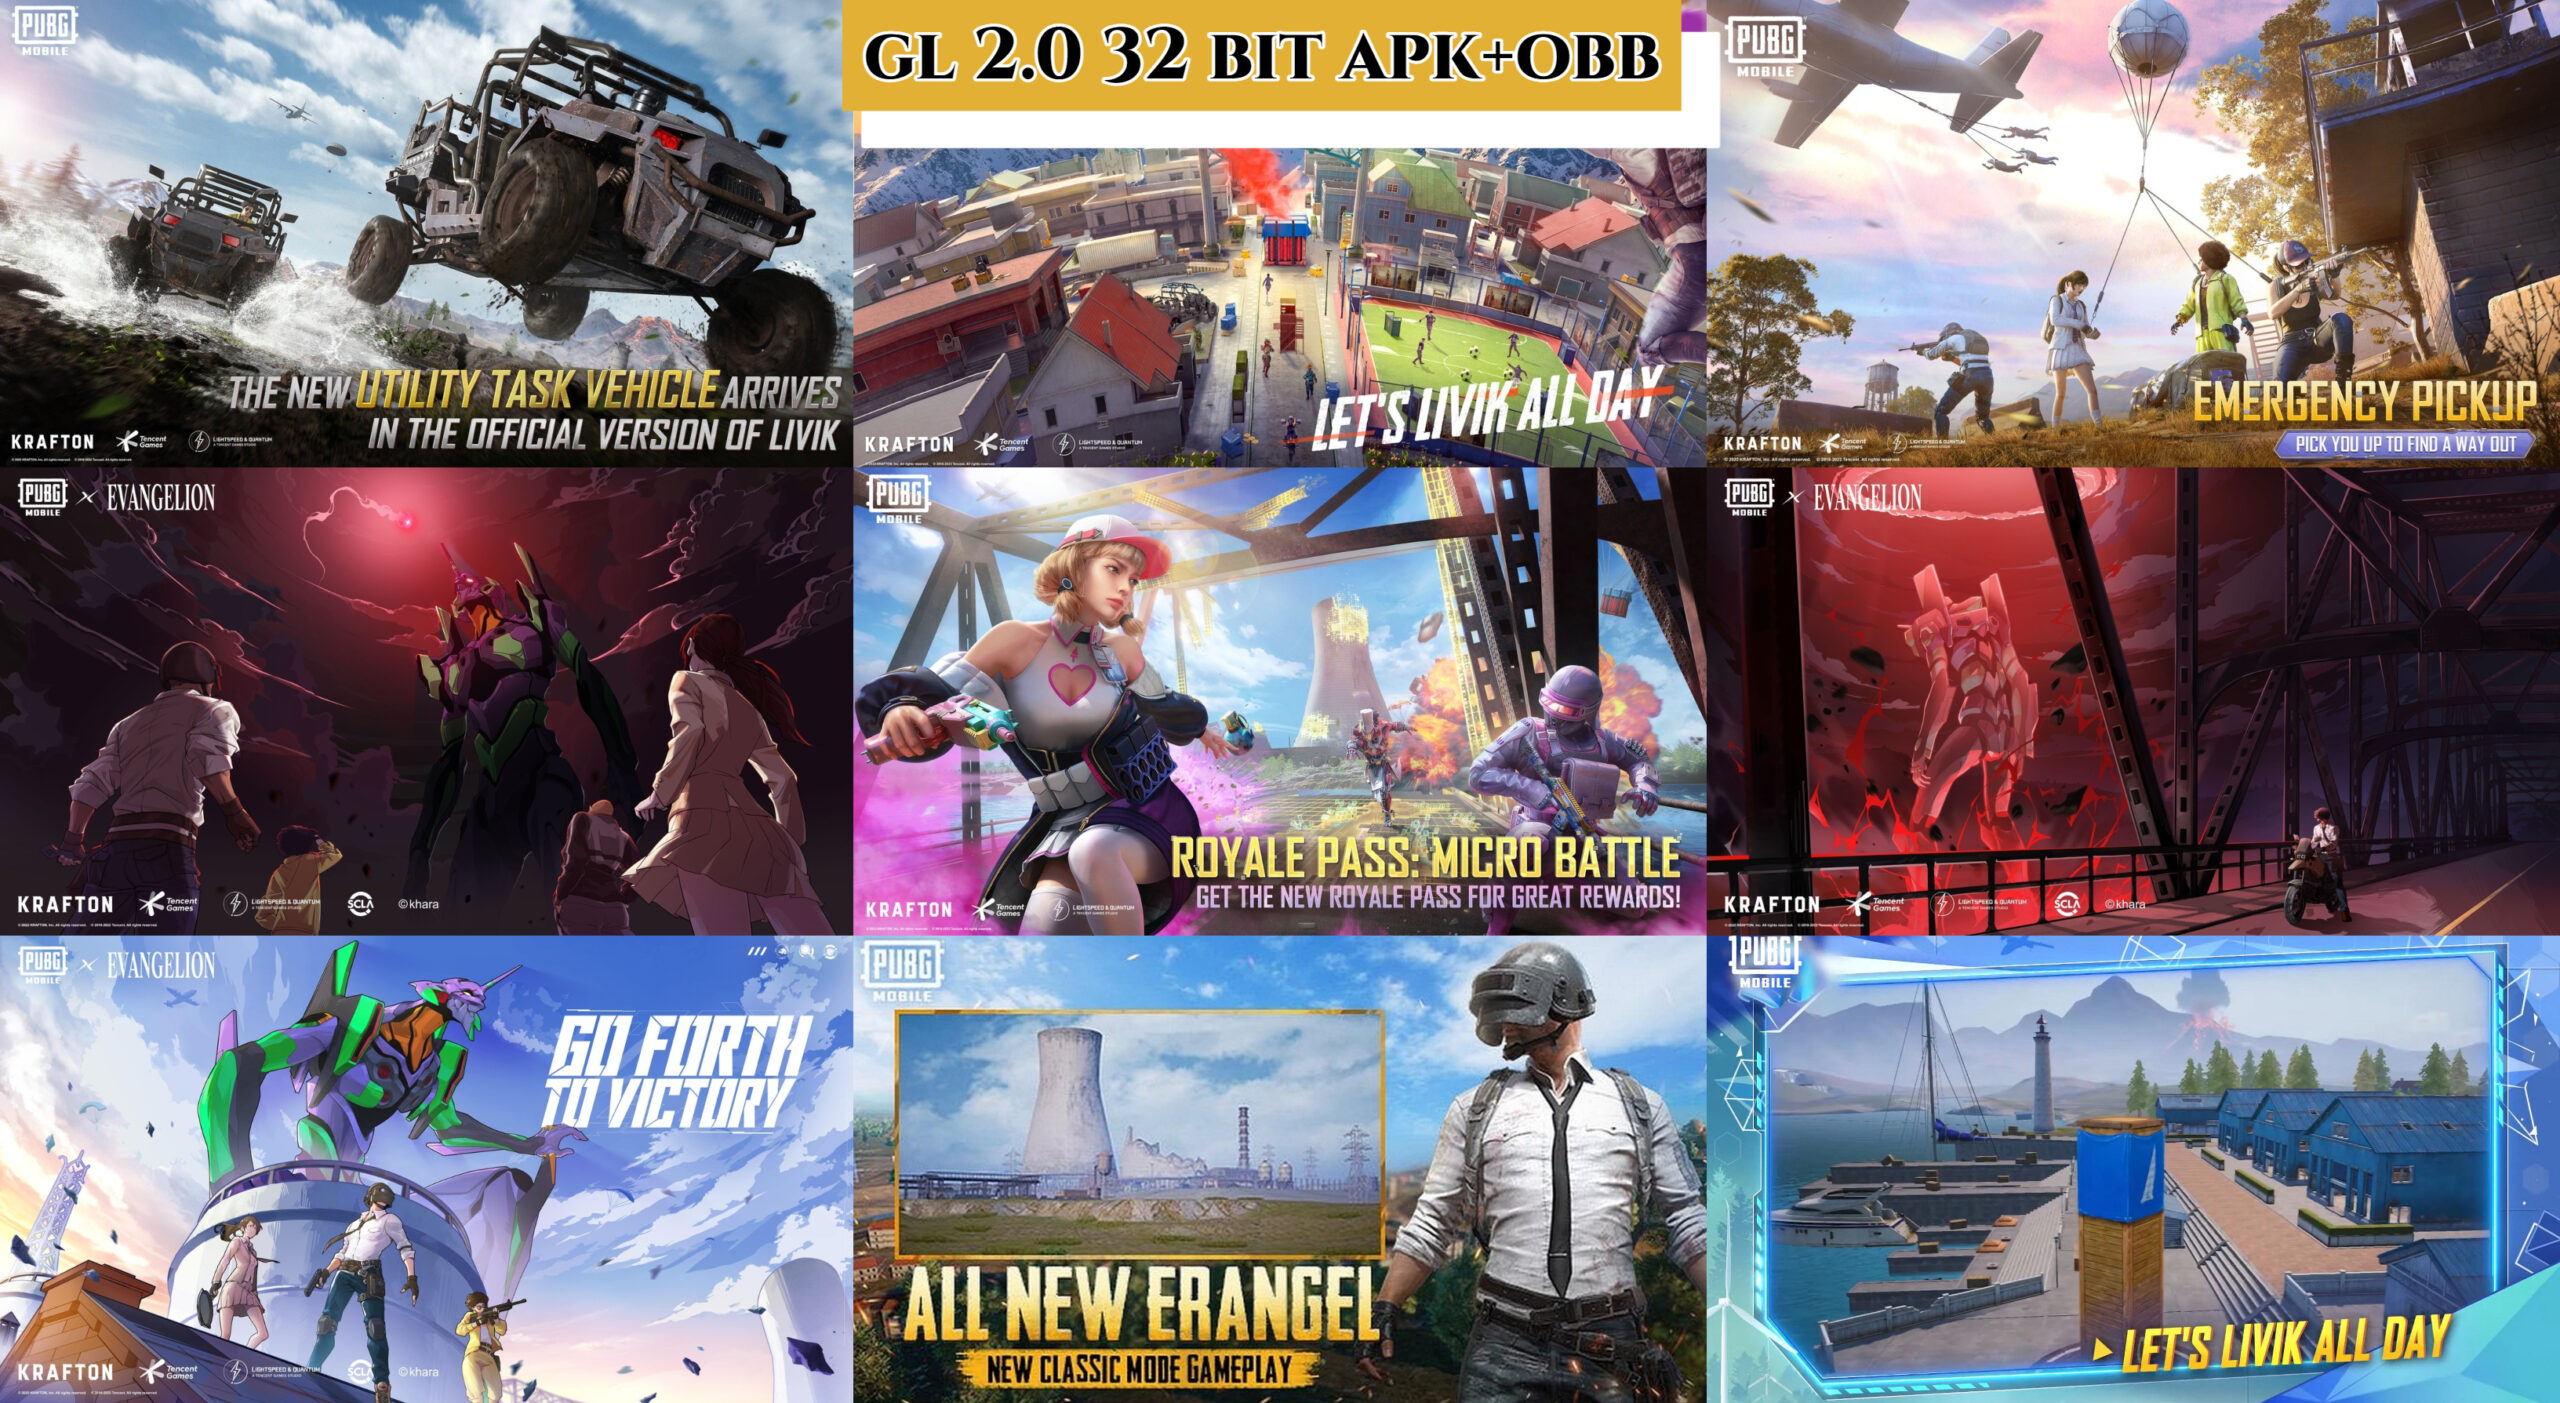 You are currently viewing PUBG Mobile Global 2.0 Update APK 32 BIT + OBB Download